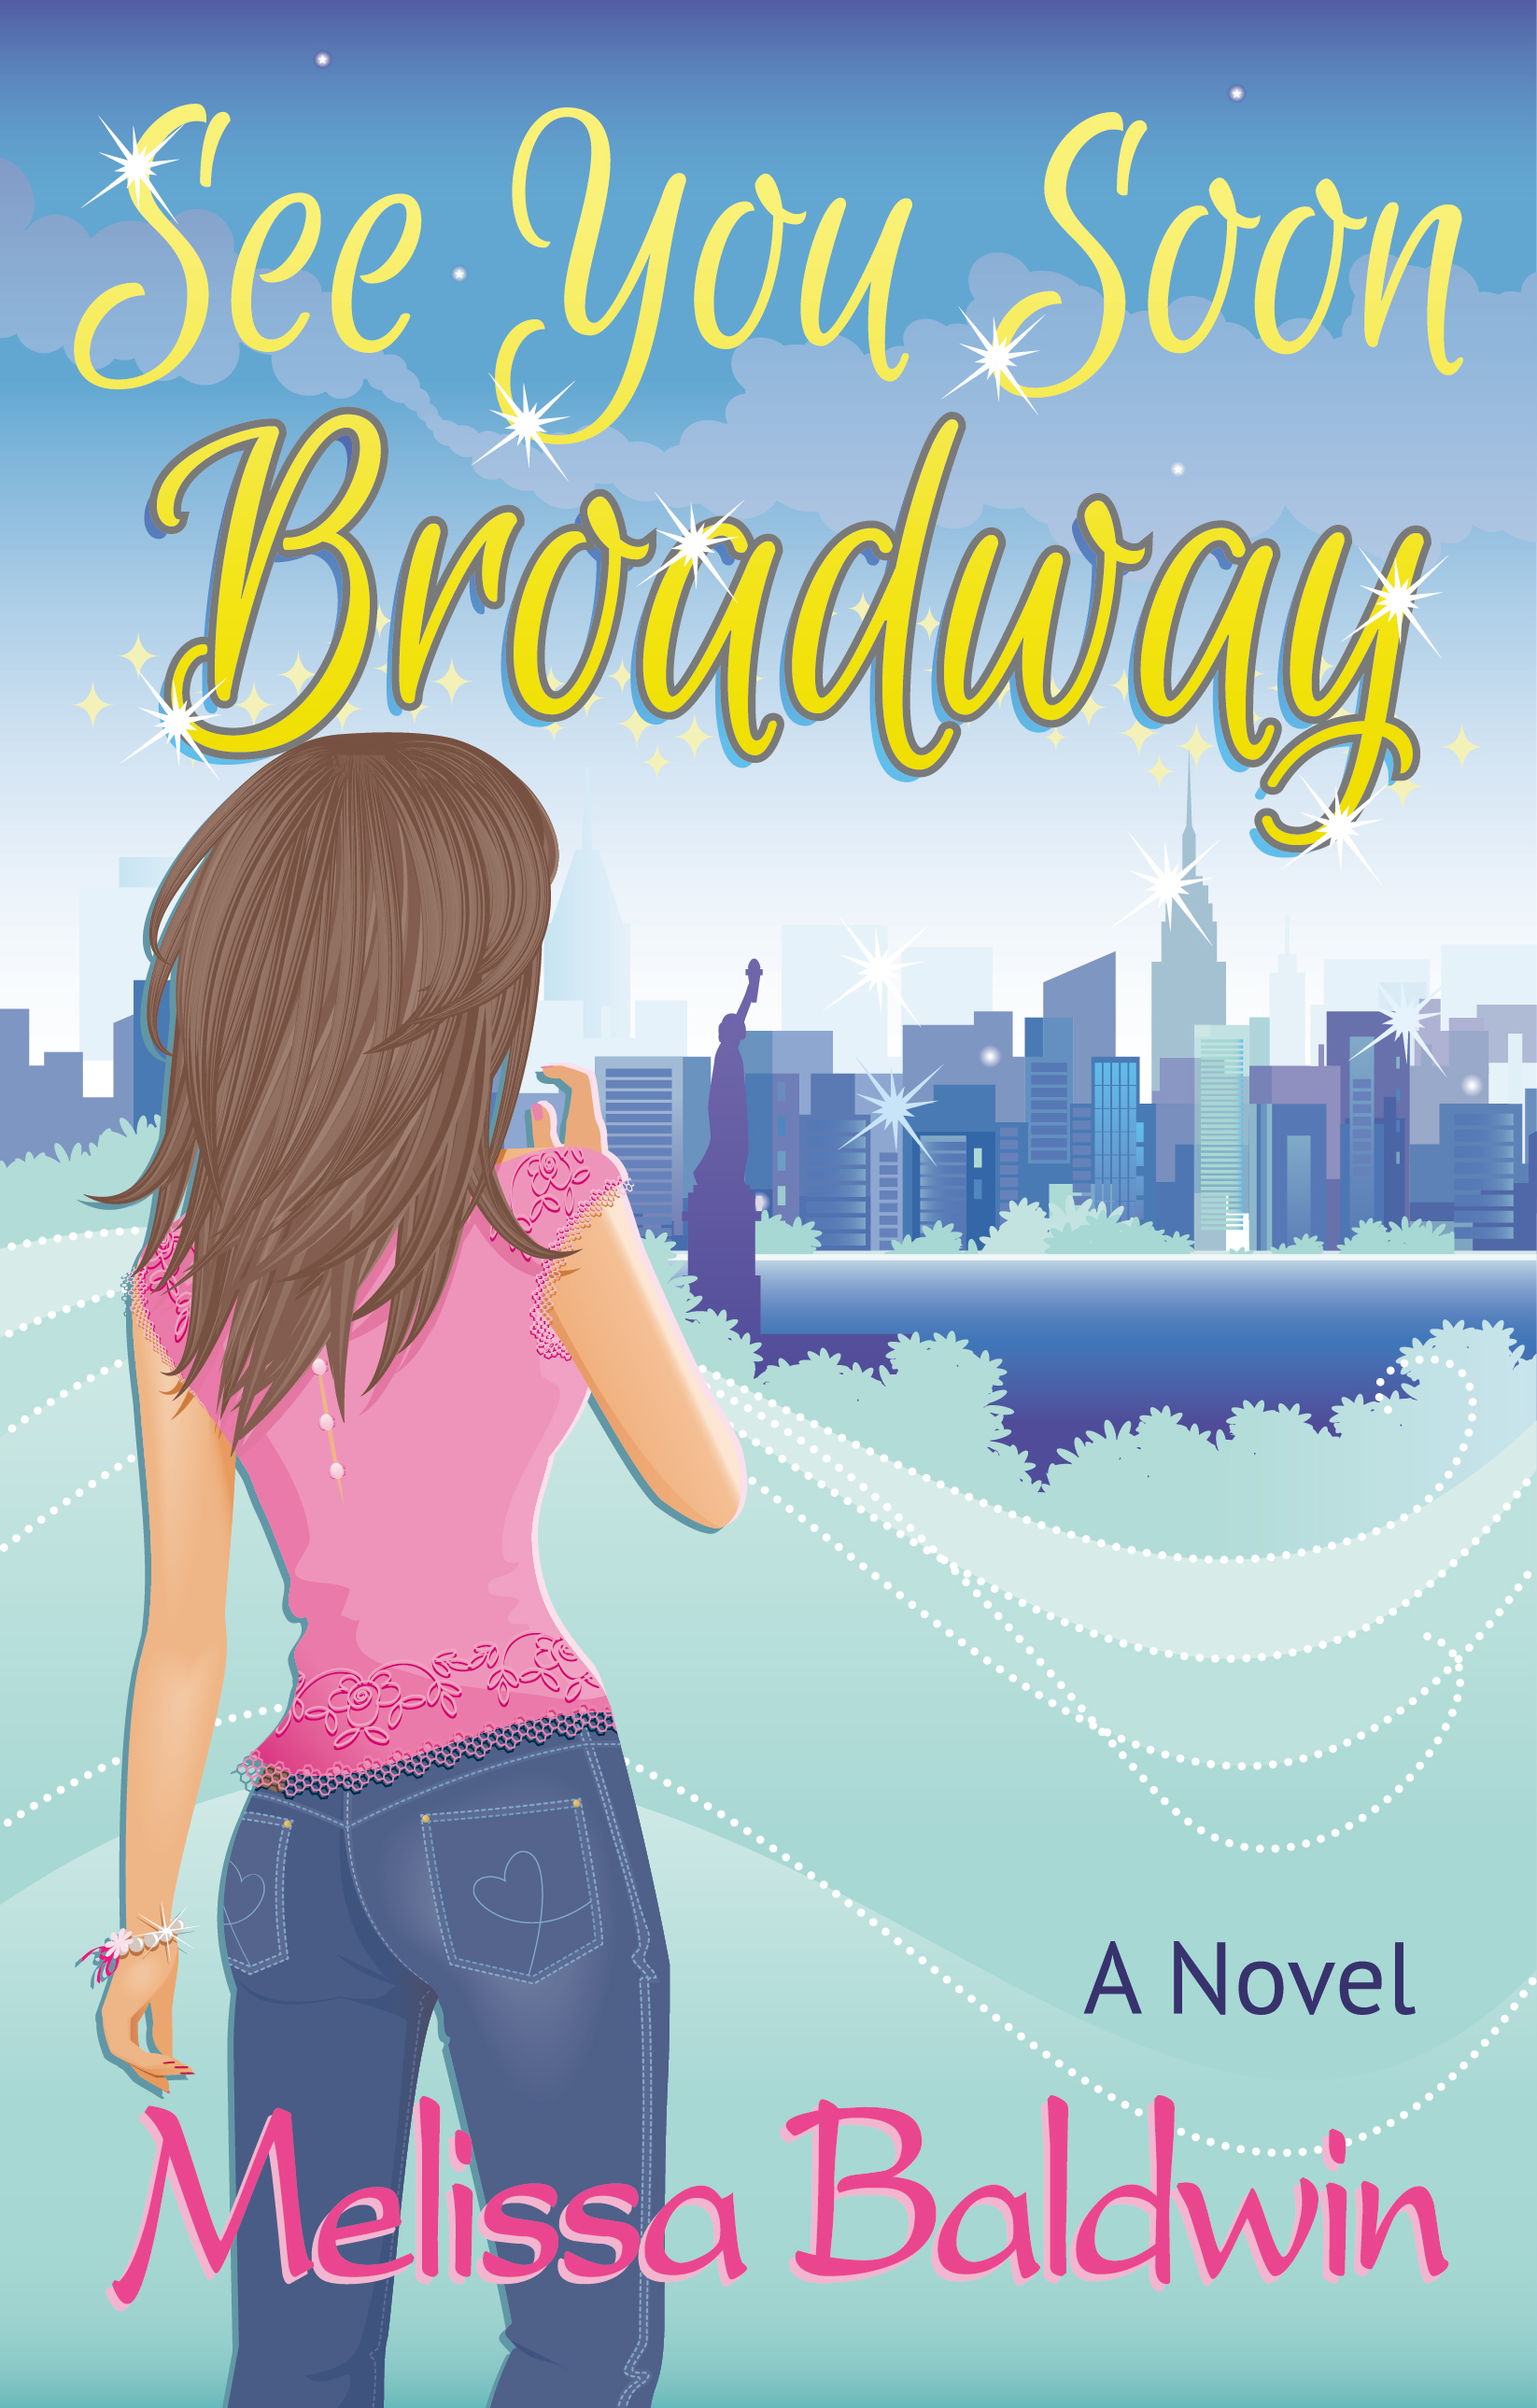 See You Soon Broadway ebook cover (1)